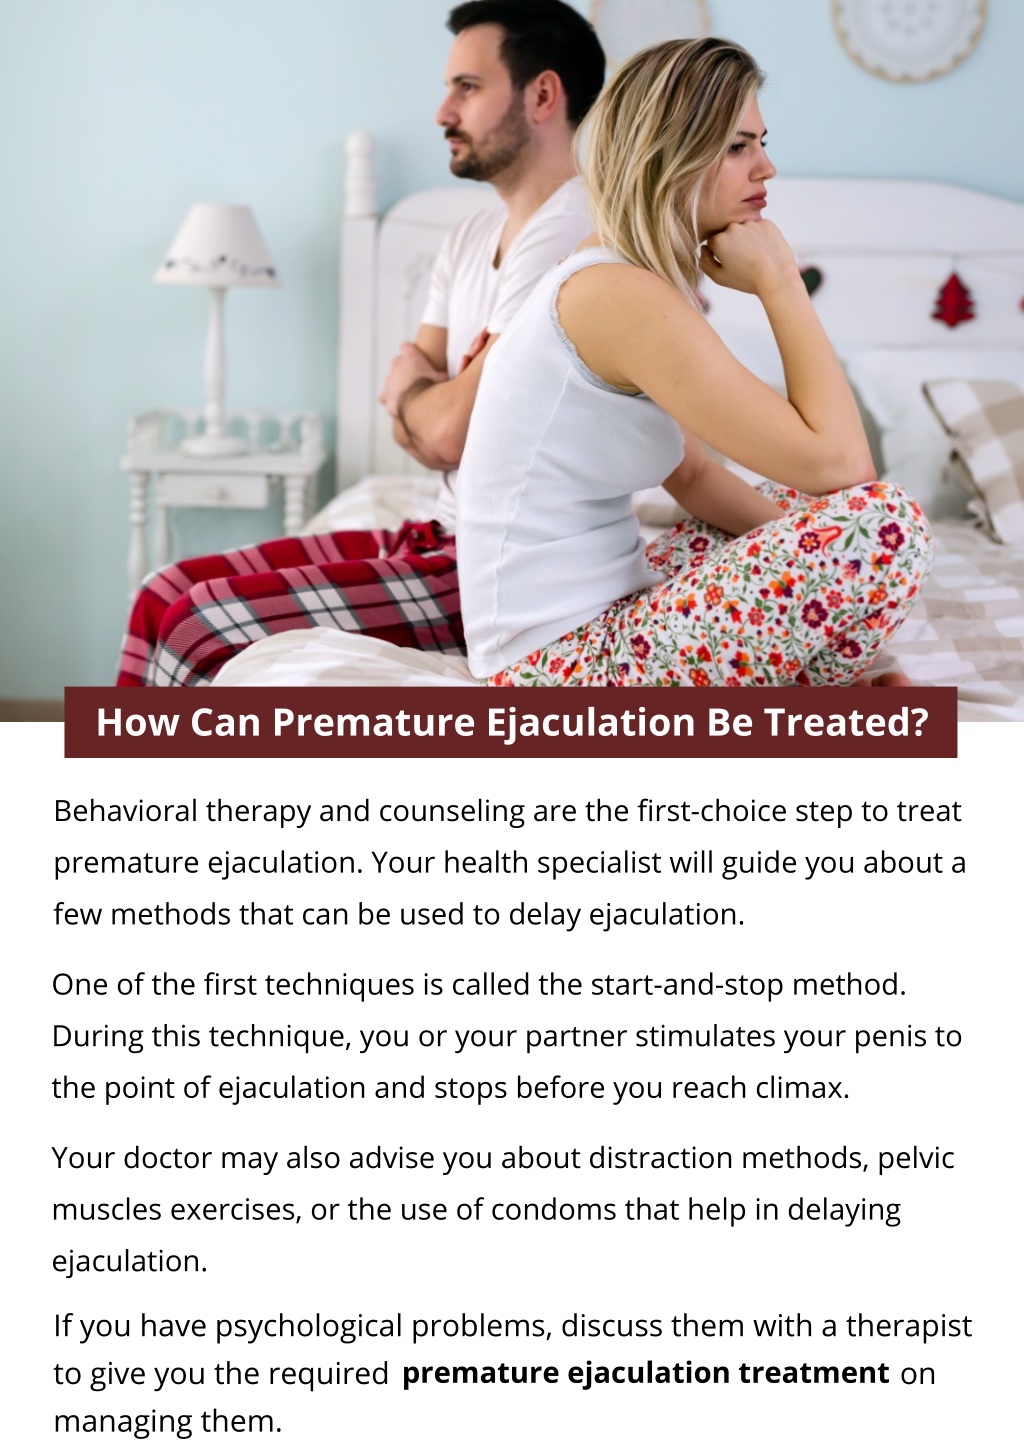 Ppt How Can Premature Ejaculation Be Treated Powerpoint Presentation Id11909388 8347